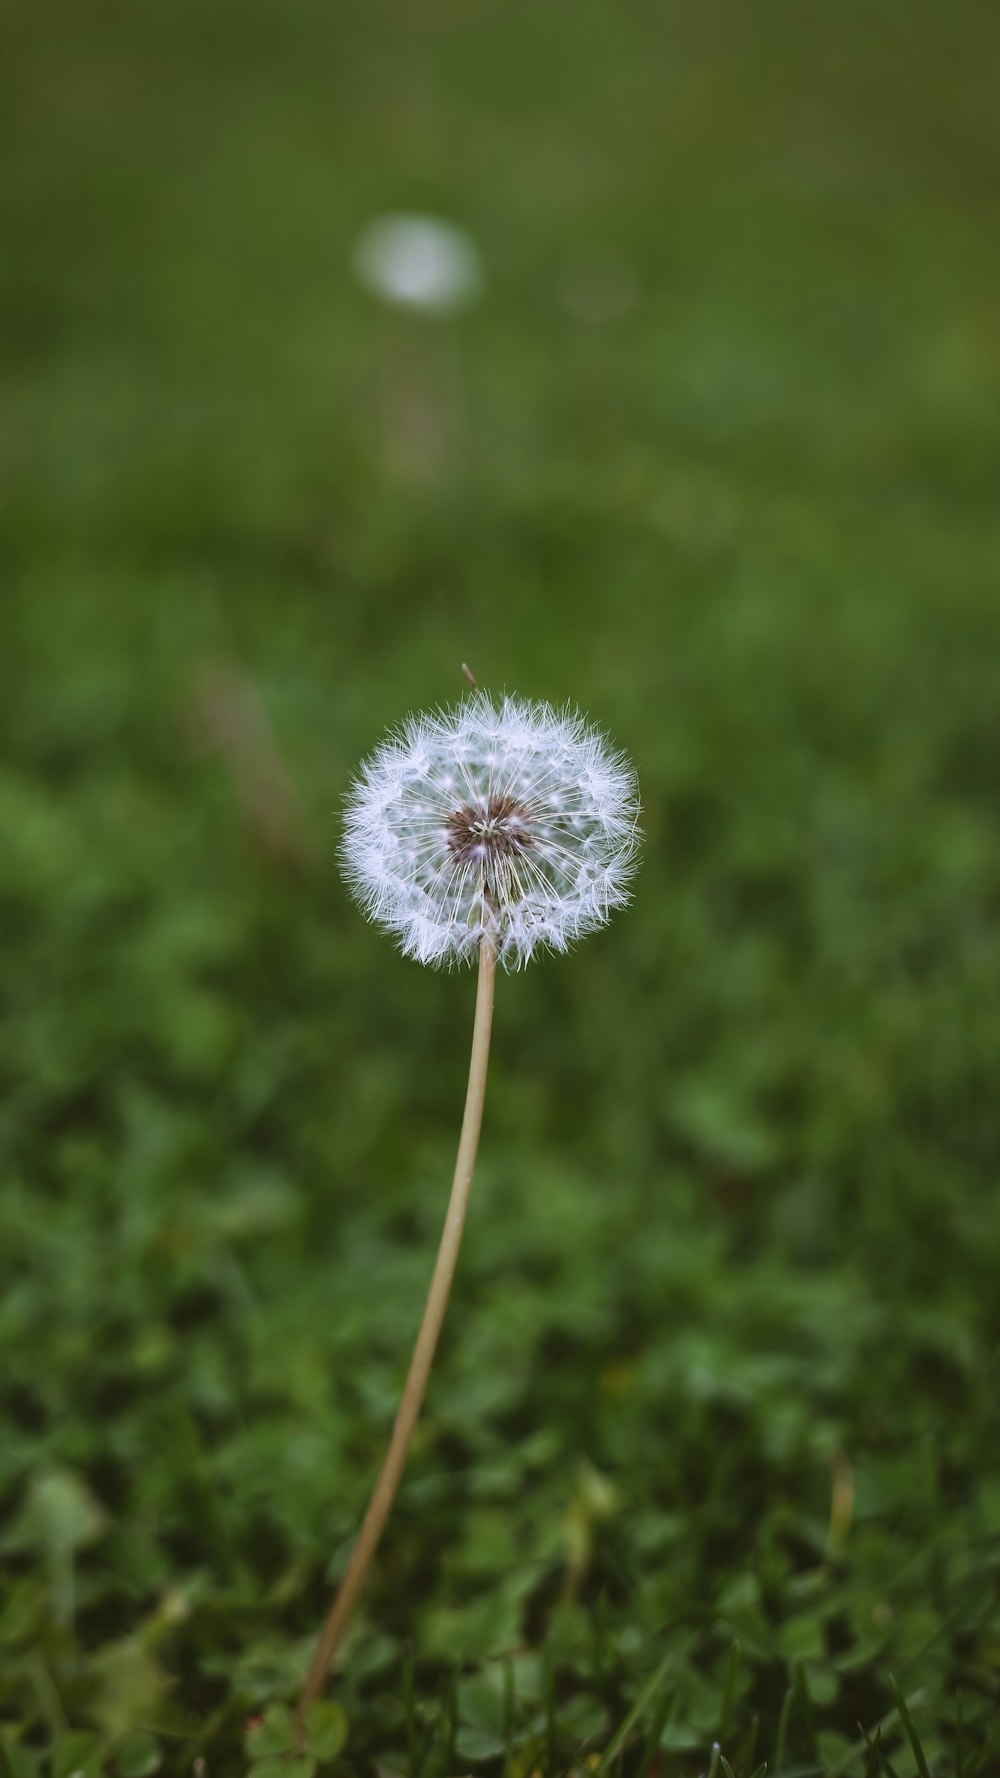 a dandelion flower with water droplets on it